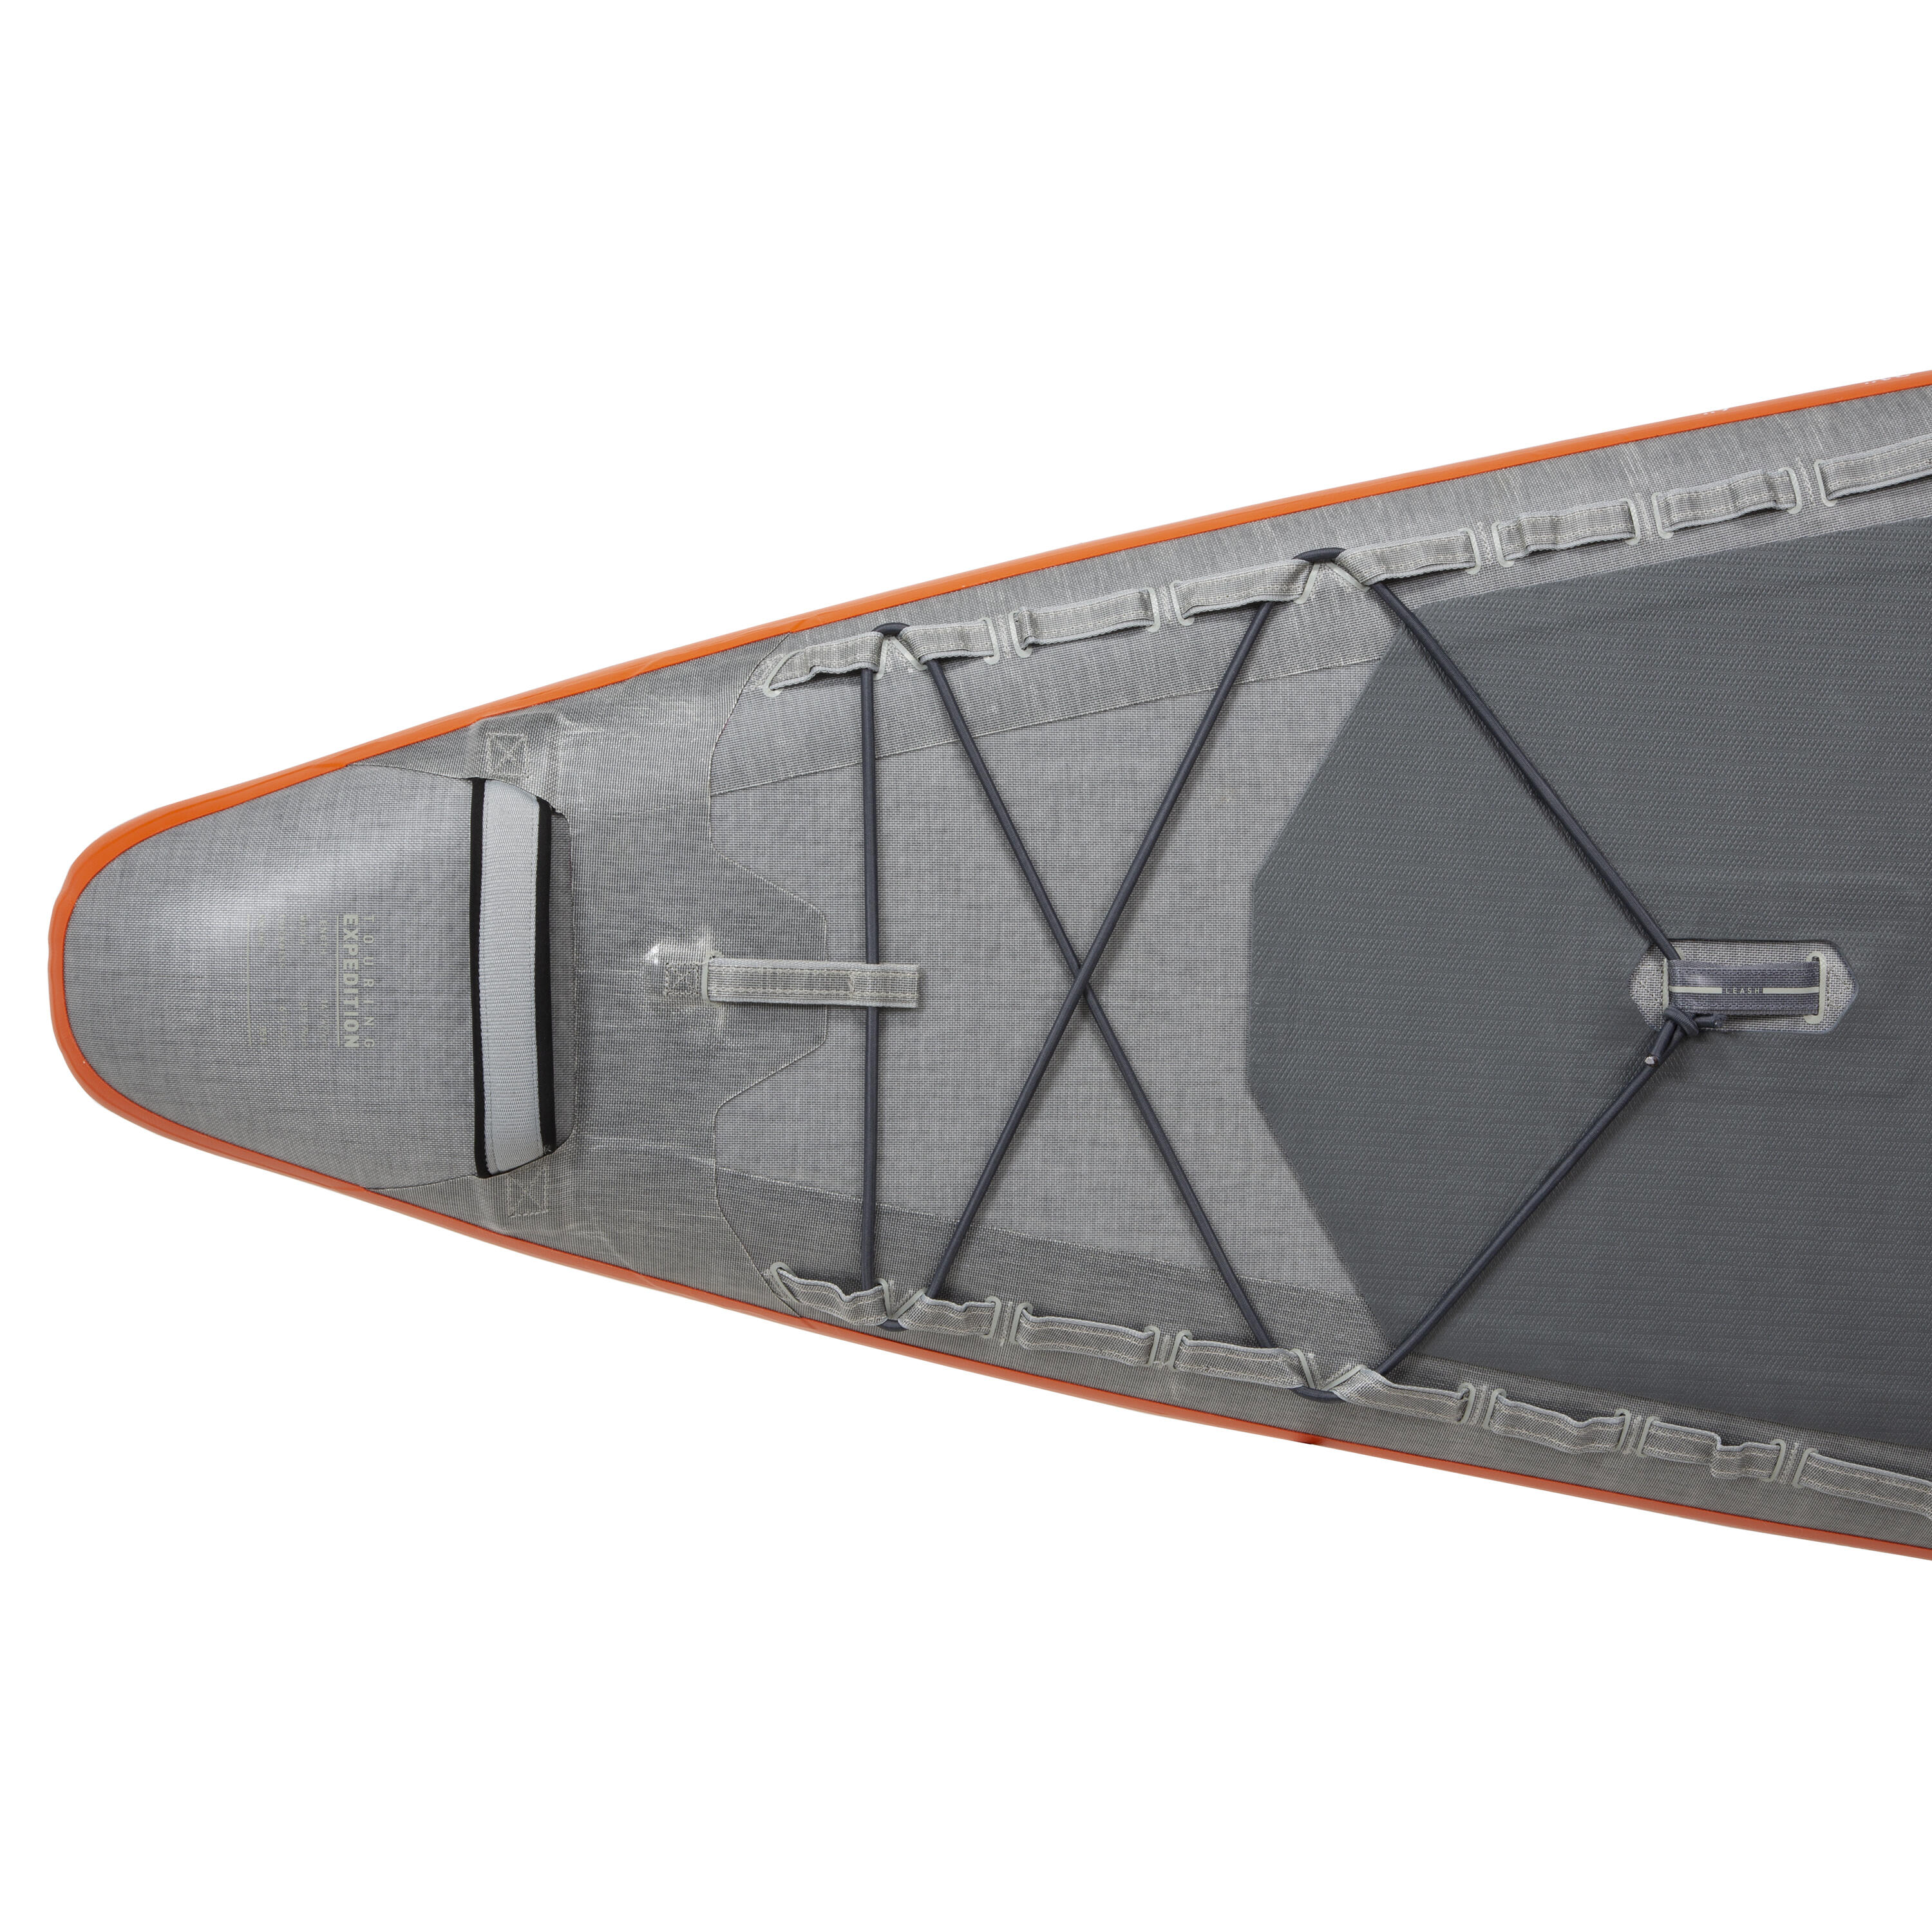 X900 14FT EXPEDITION INFLATABLE STAND-UP PADDLEBOARD (DOUBLE CHAMBER) 15/26